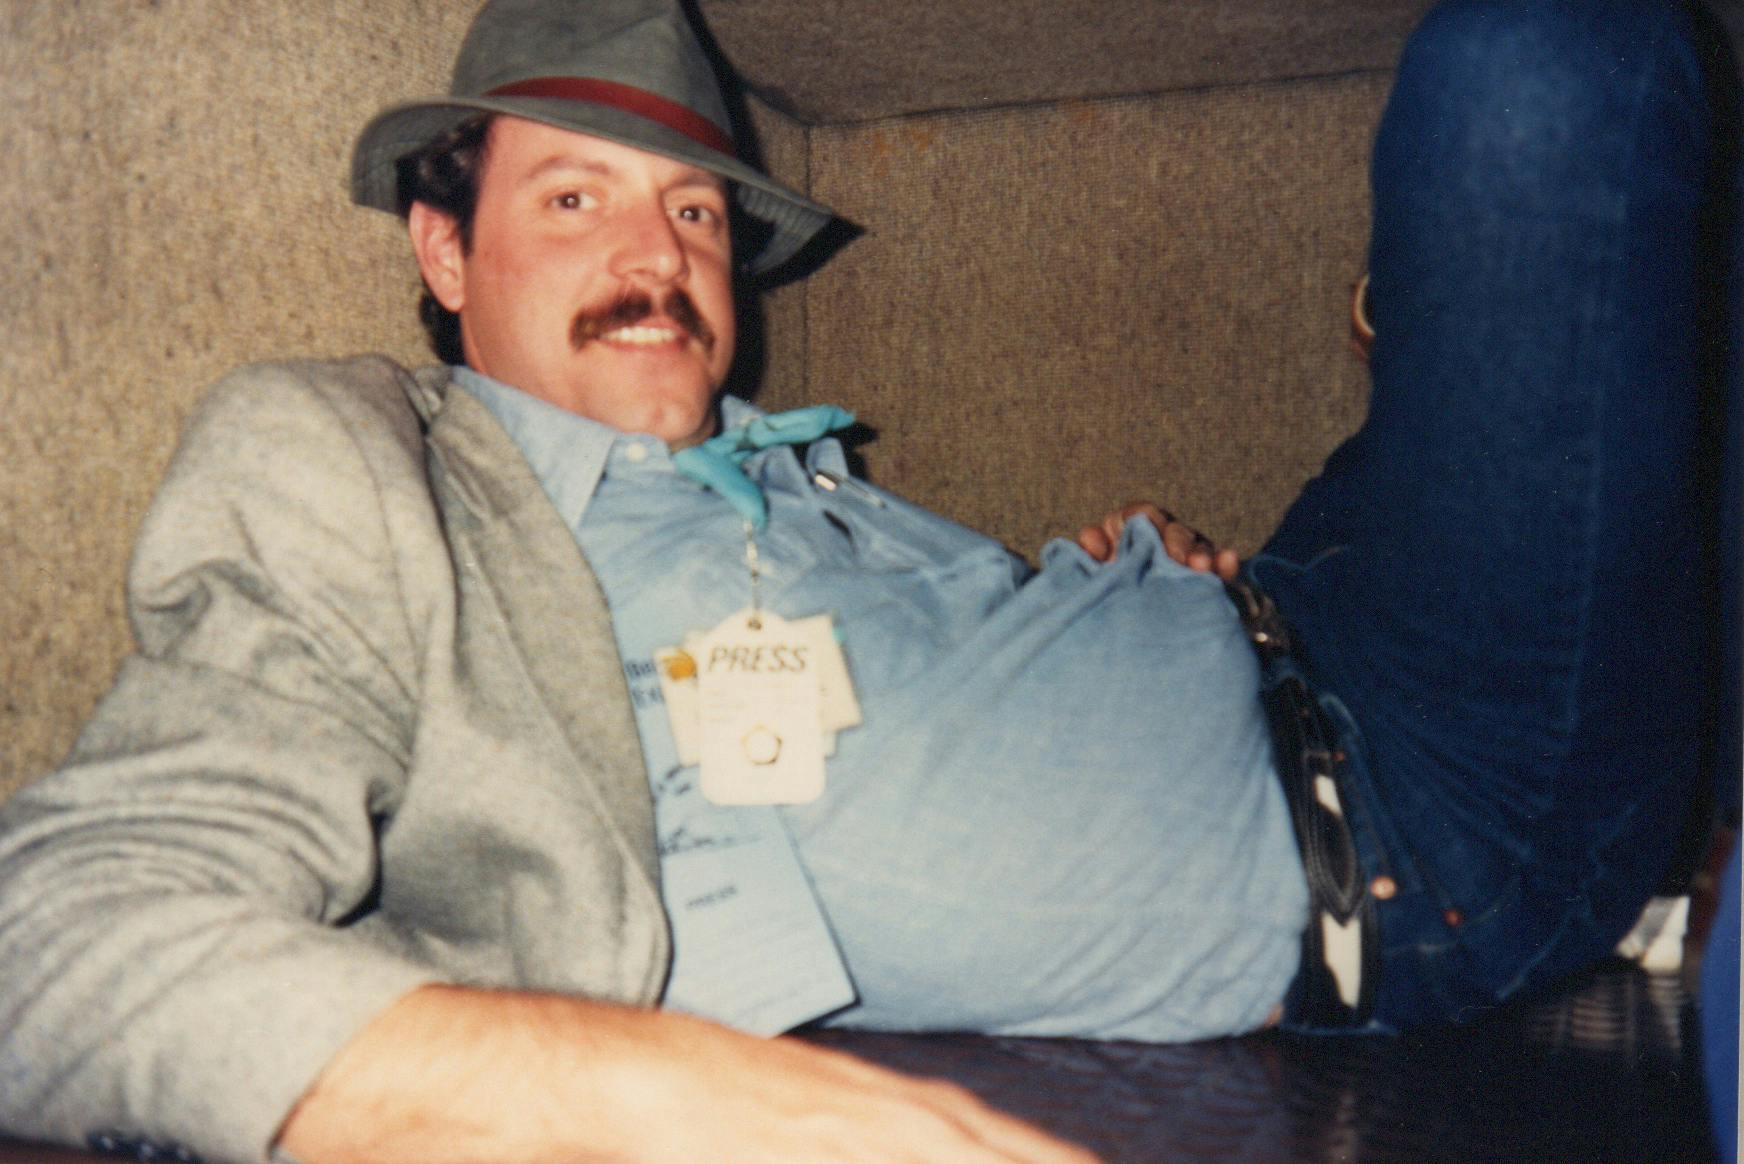 R.G. Ratcliffe hanging out in the luggage compartment of a train during the 1988 Michael Dukakis campaign for president.